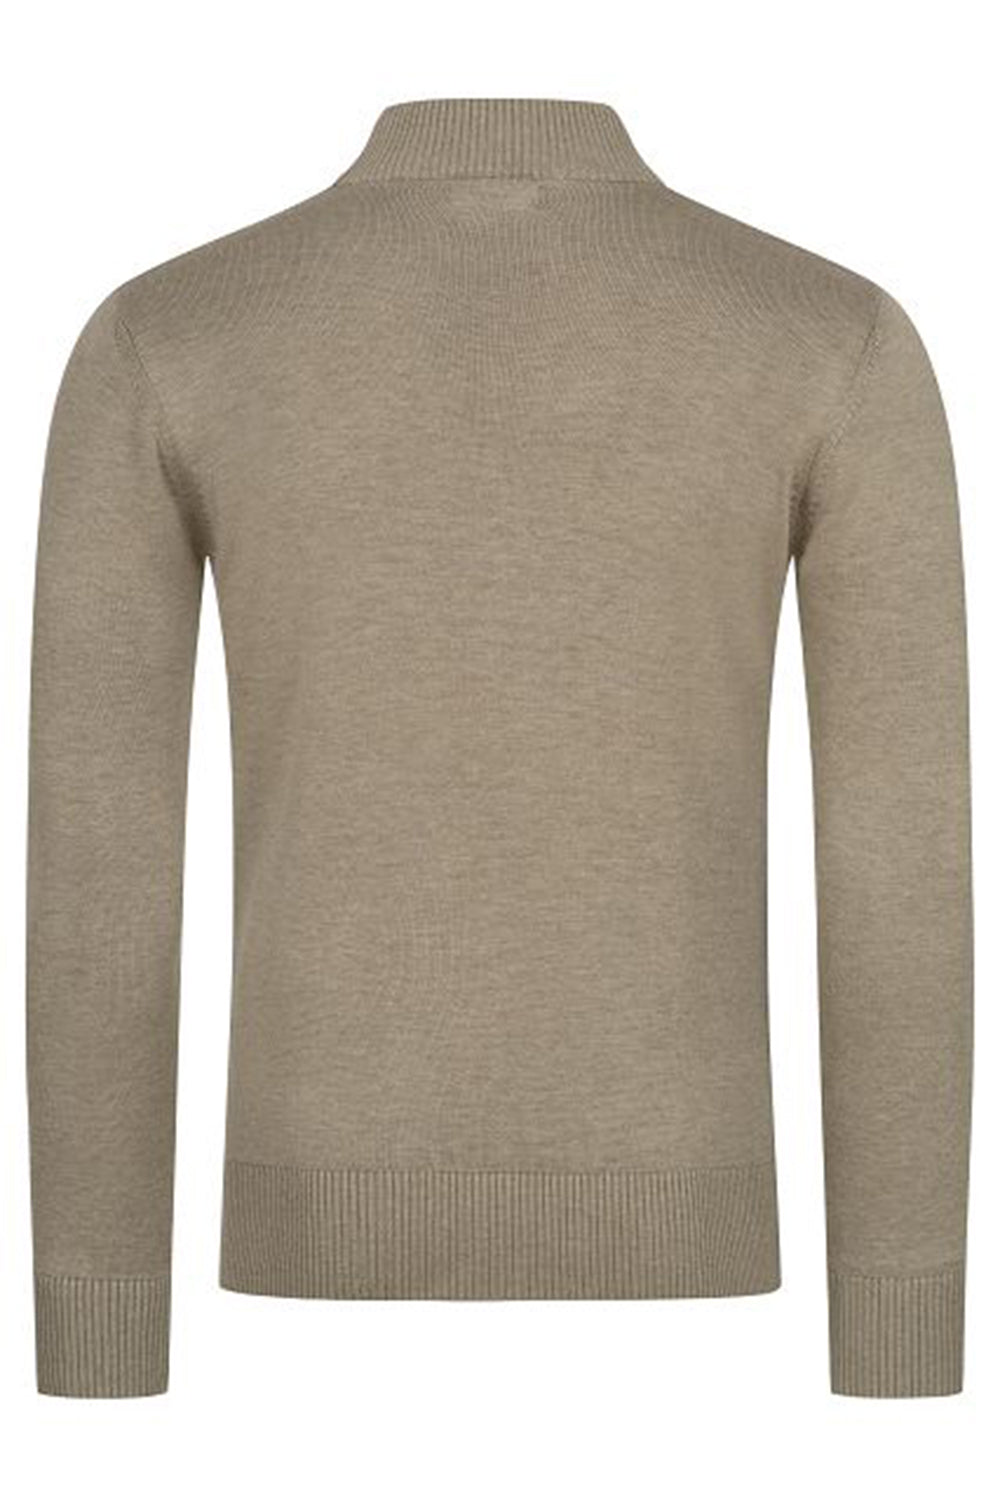 Men's knitted sweater Pascal